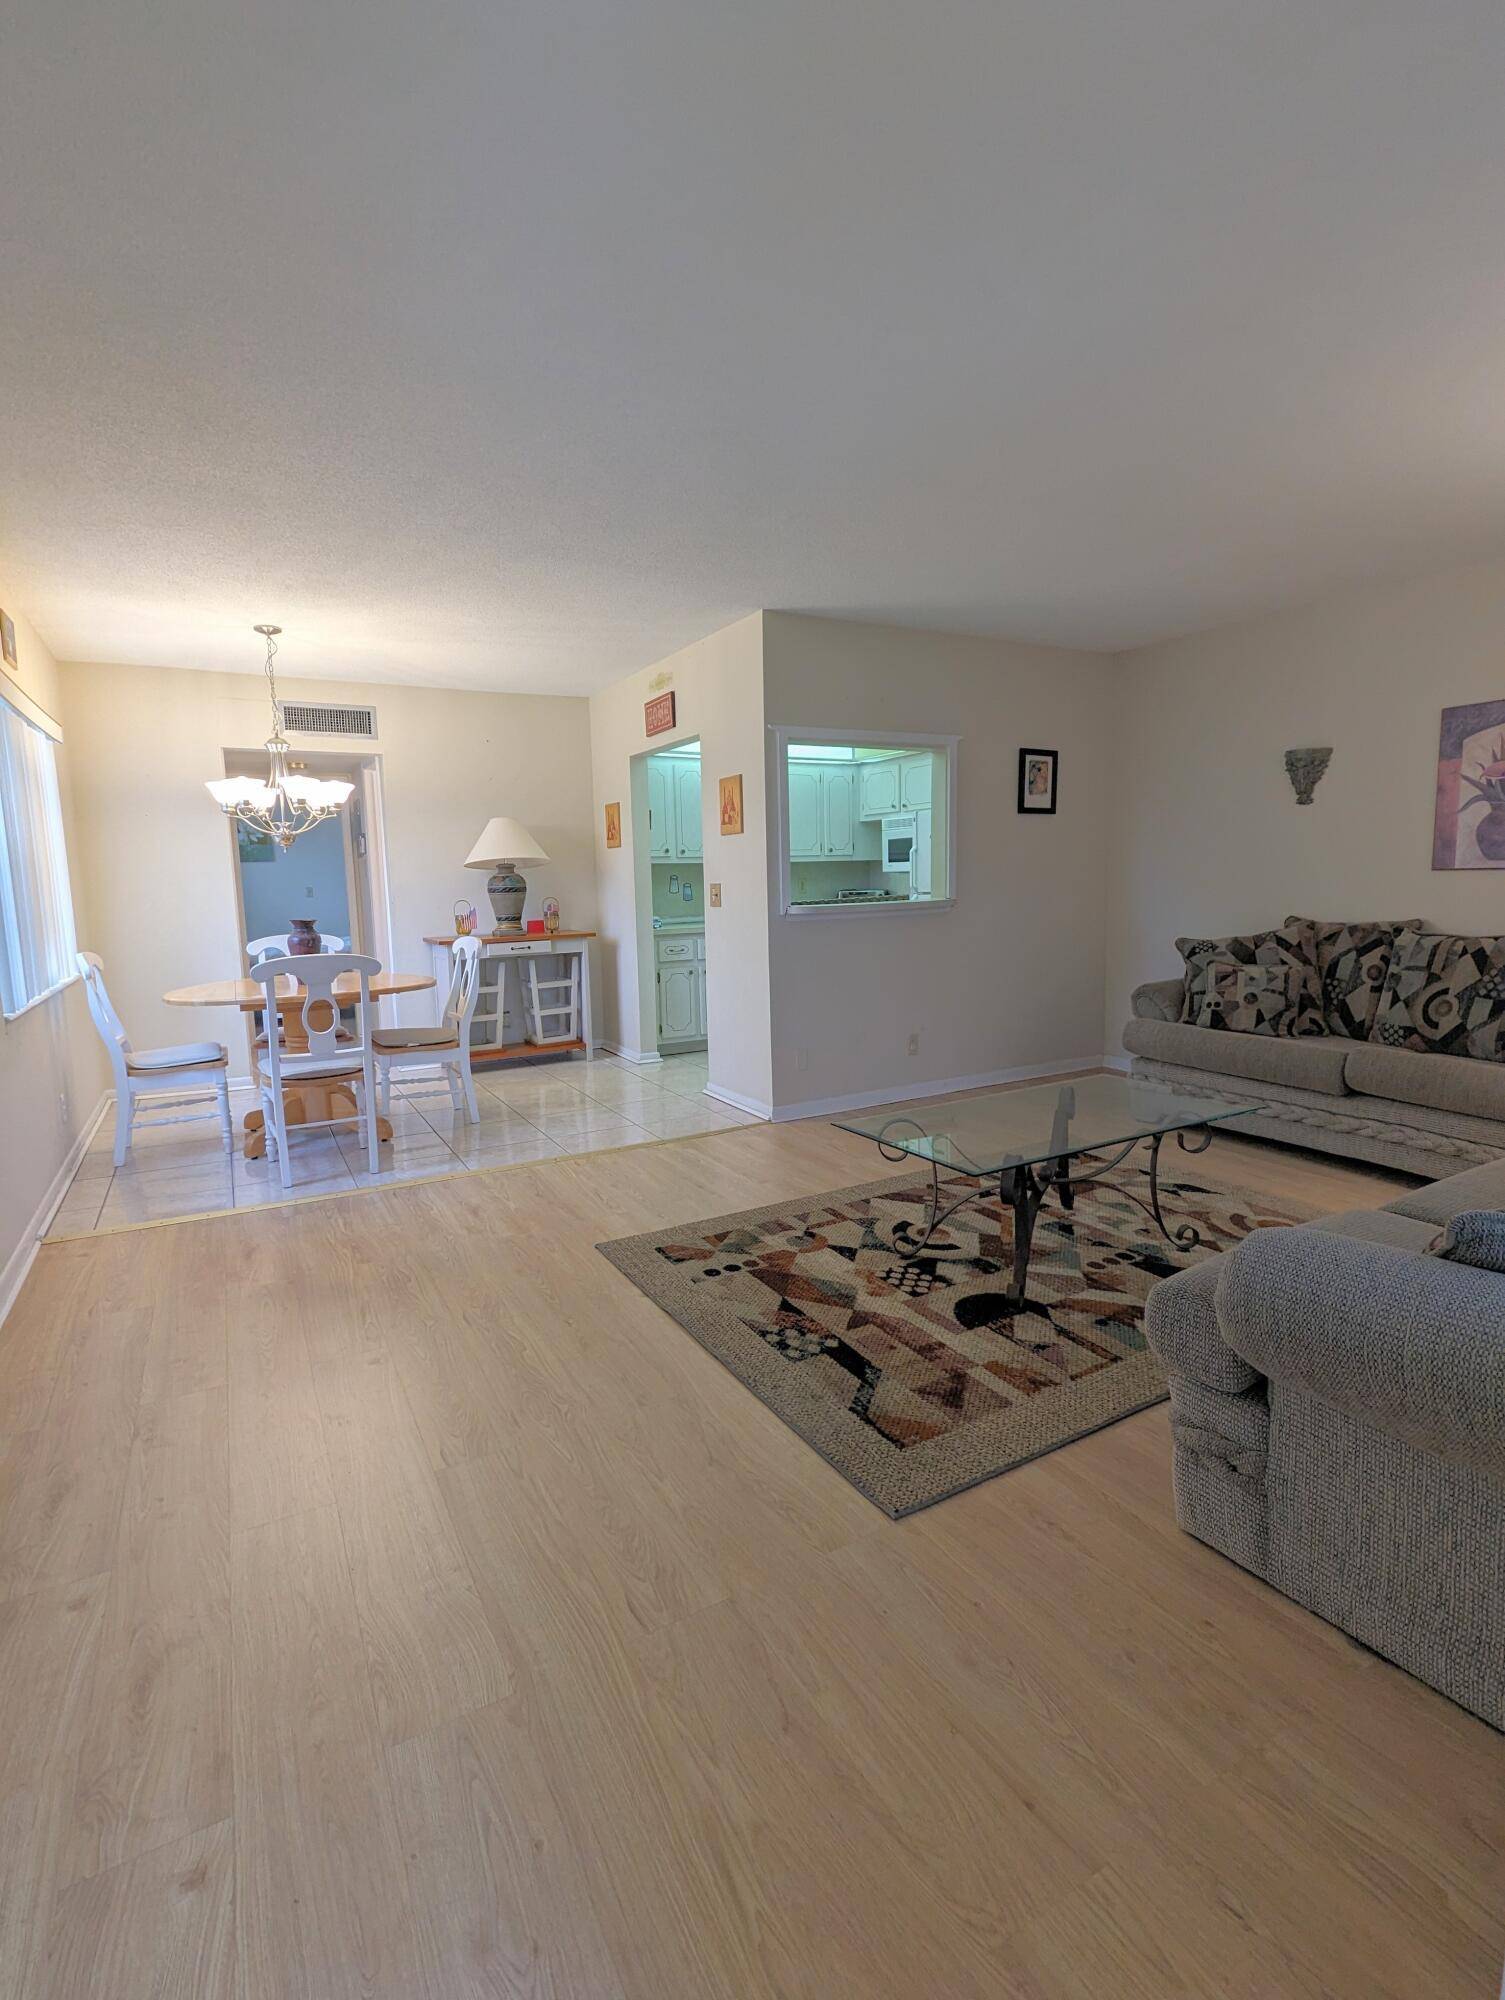 Bright Corner unit, near Community center ; New Living Dining Bedroom floors ; Renovated baths, Permitted electric panel update, New hot water heater, ACUnbranded Virtual Tour https www.